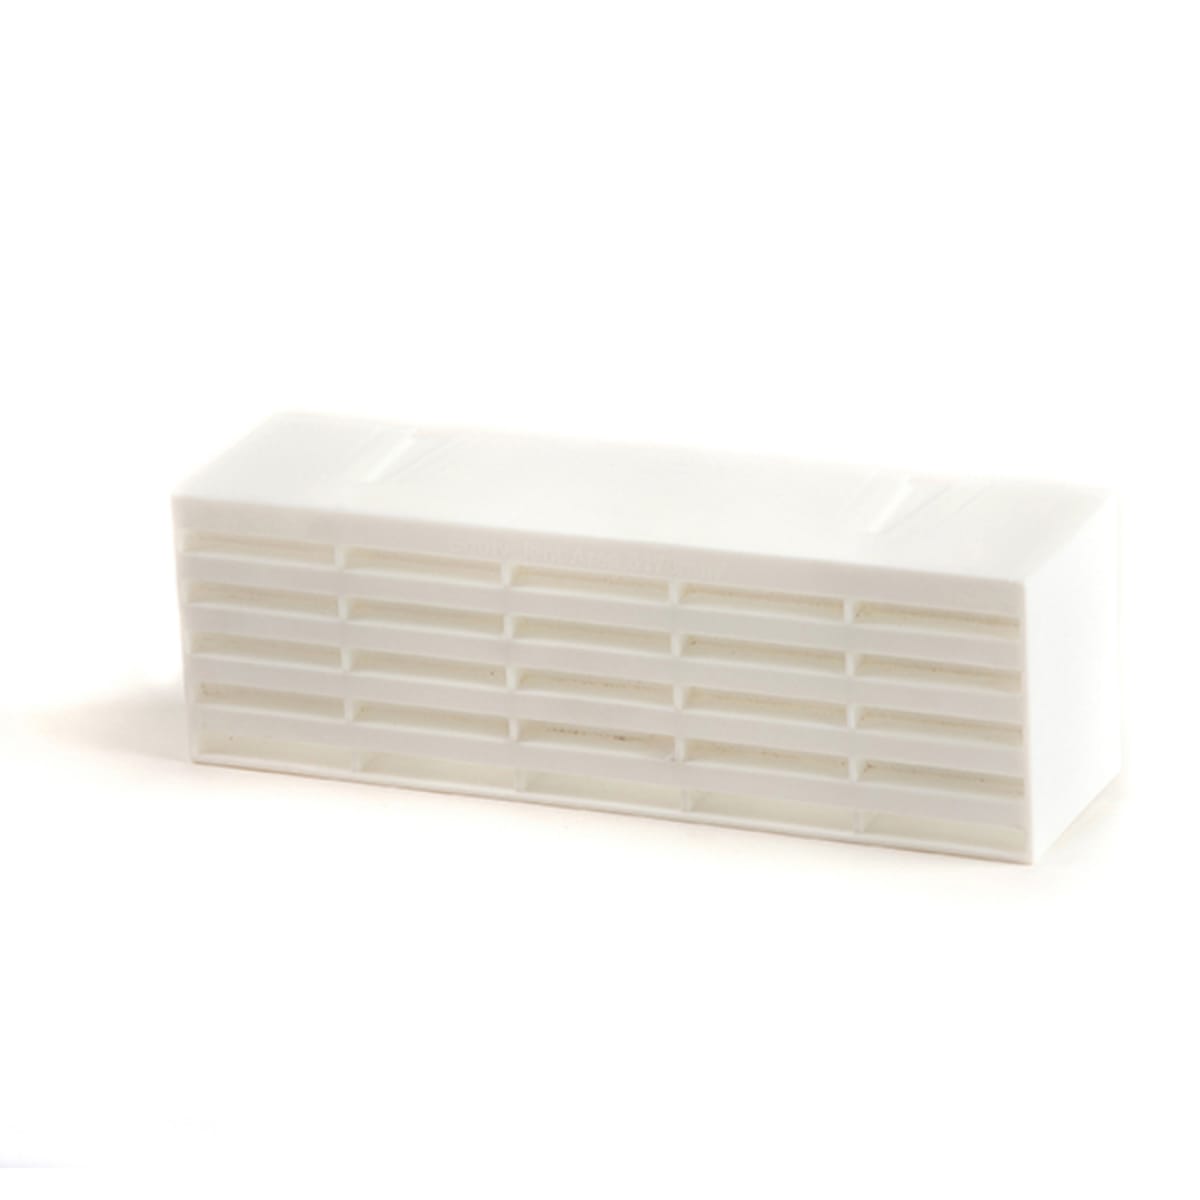 Product image for Timloc Airbrick 215 X 69 X 60mm White